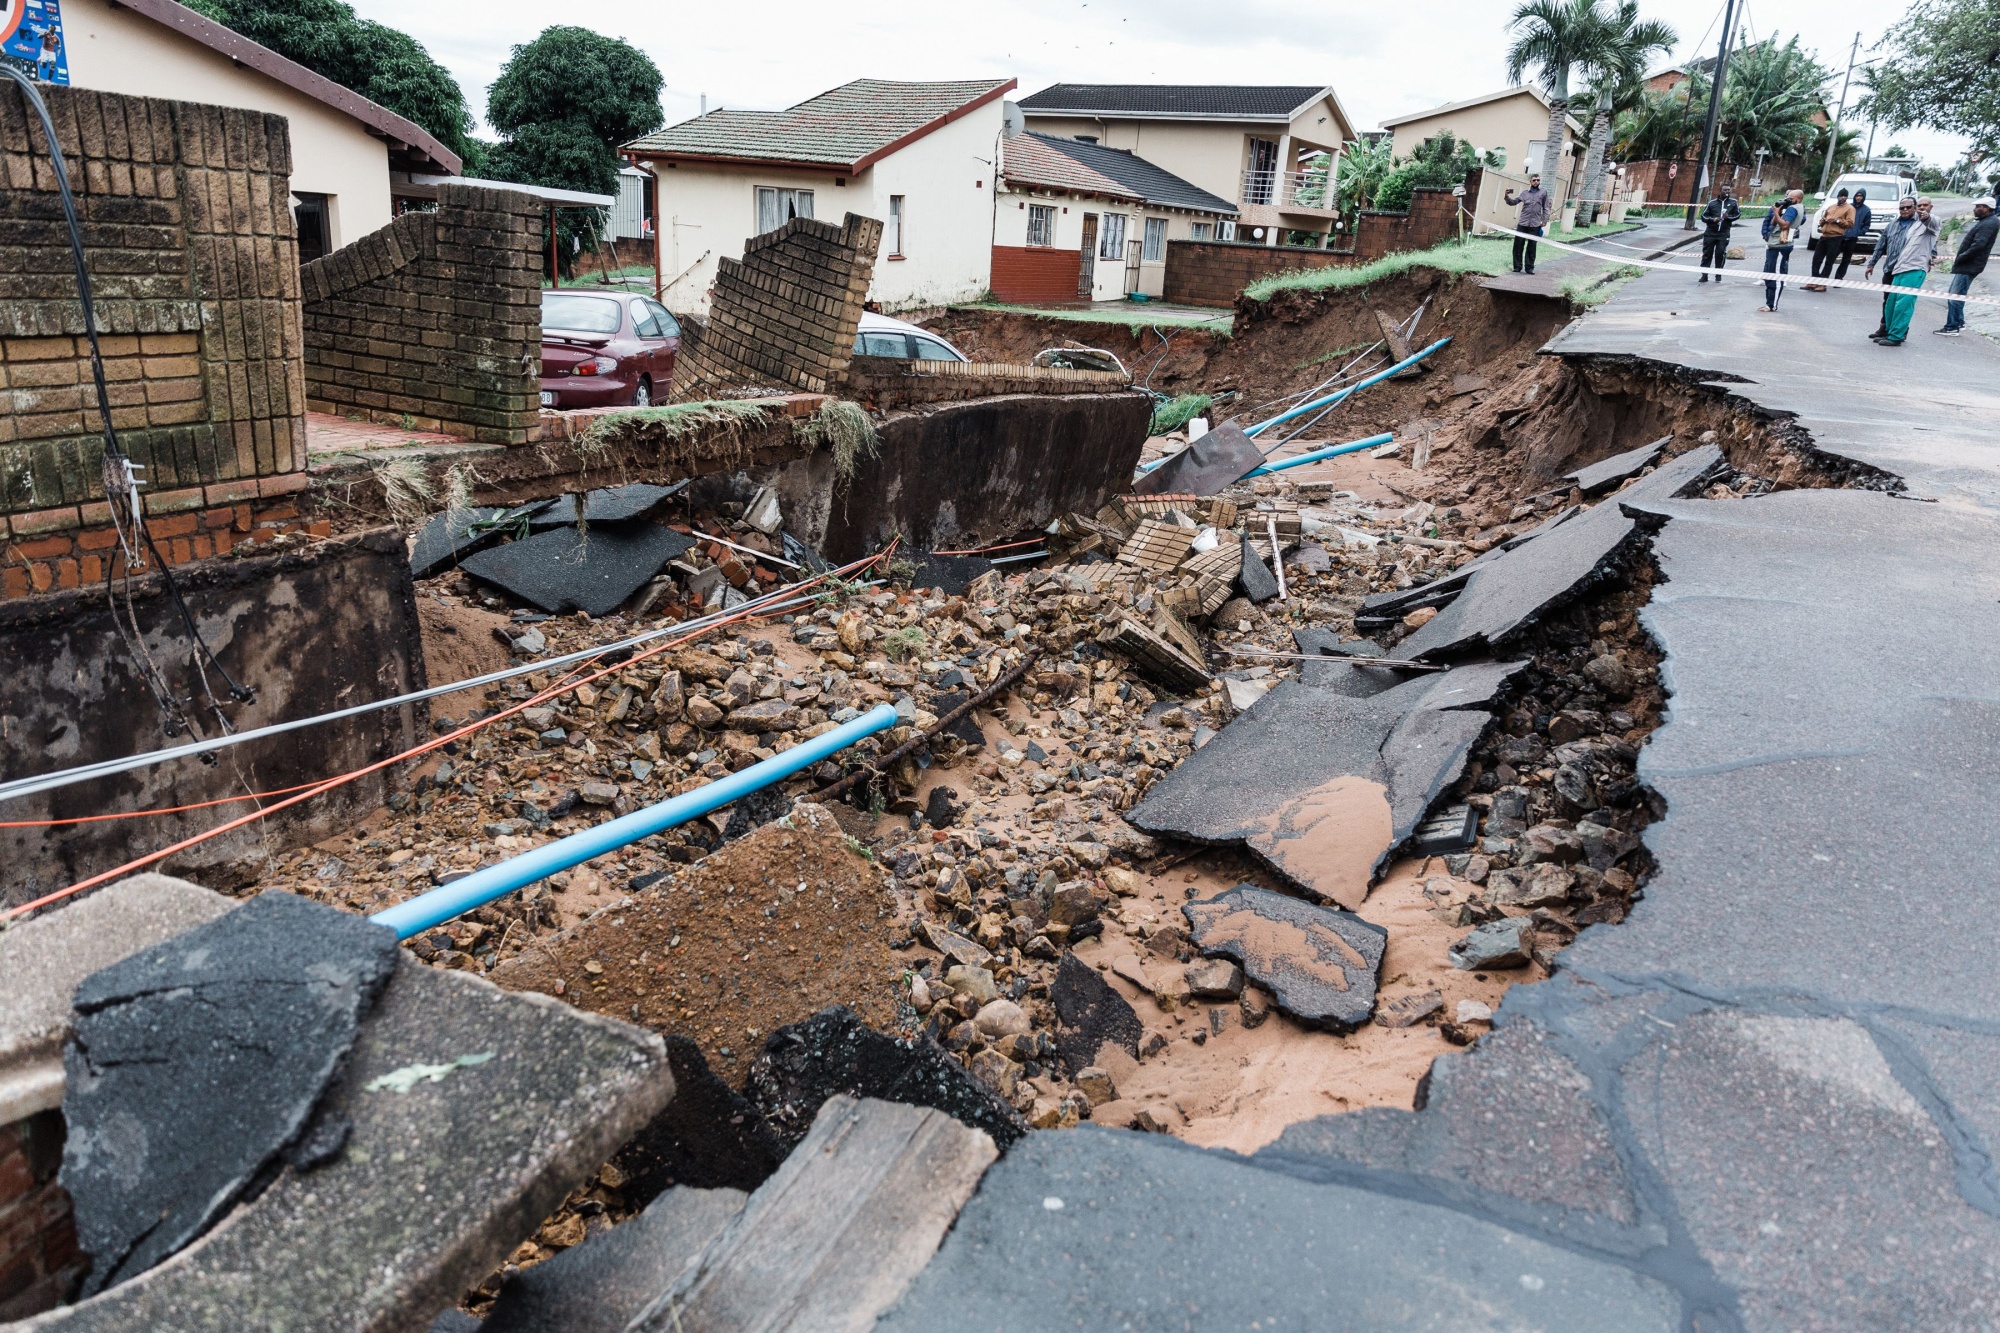 KZN Floods South Africa Declares Disaster After More Than 300 Die